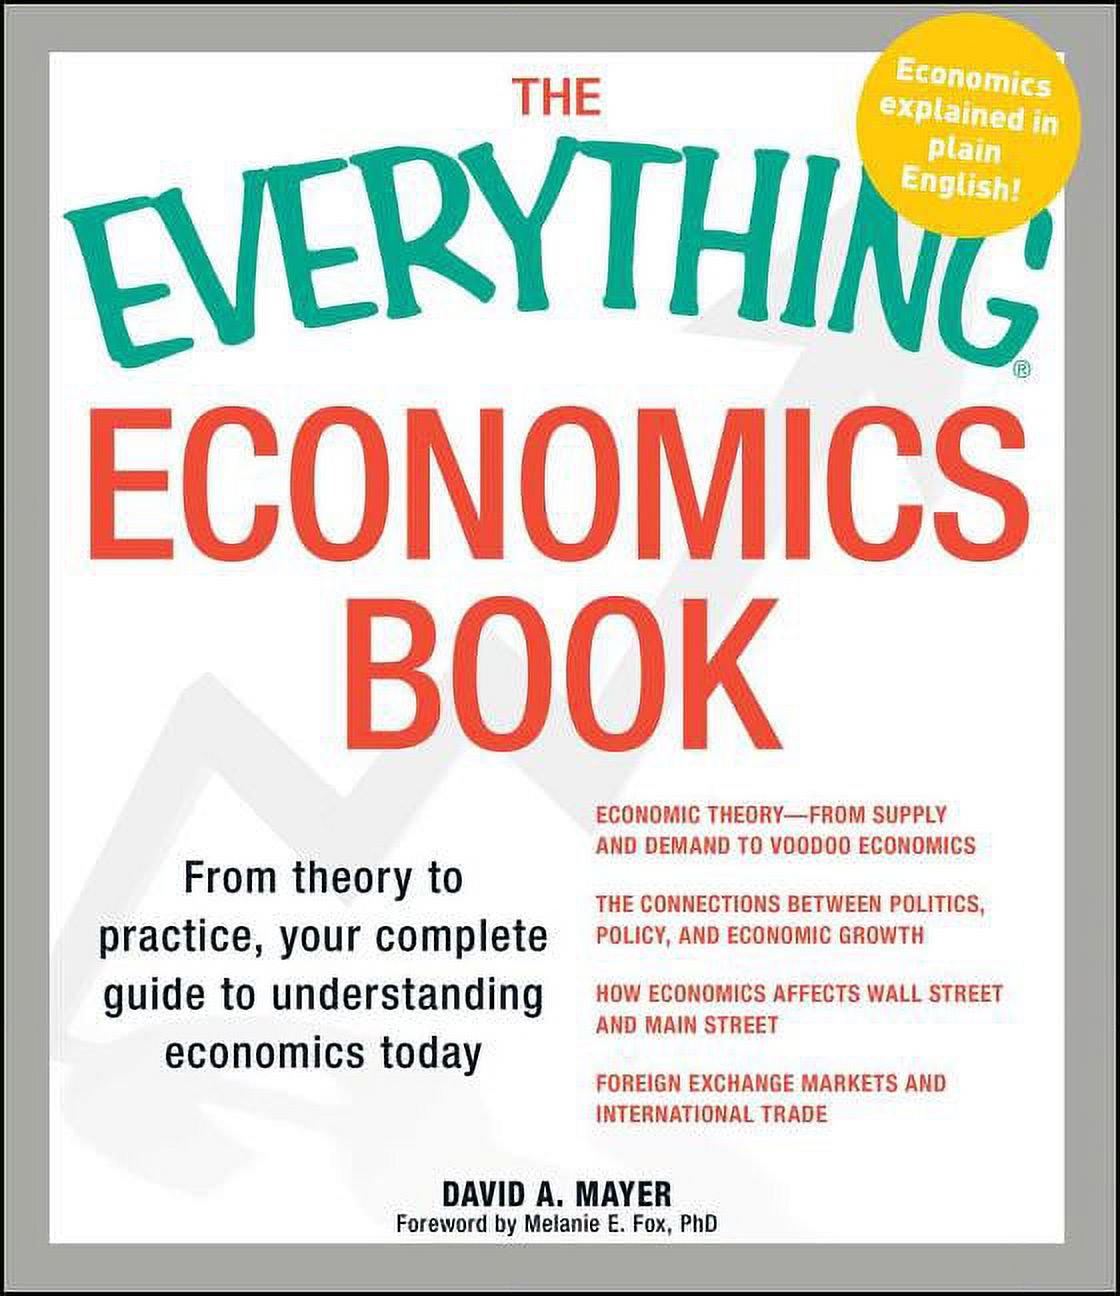 Everything® Series: The Everything Economics Book : From theory to practice, your complete guide to understanding economics today (Paperback) - image 1 of 1